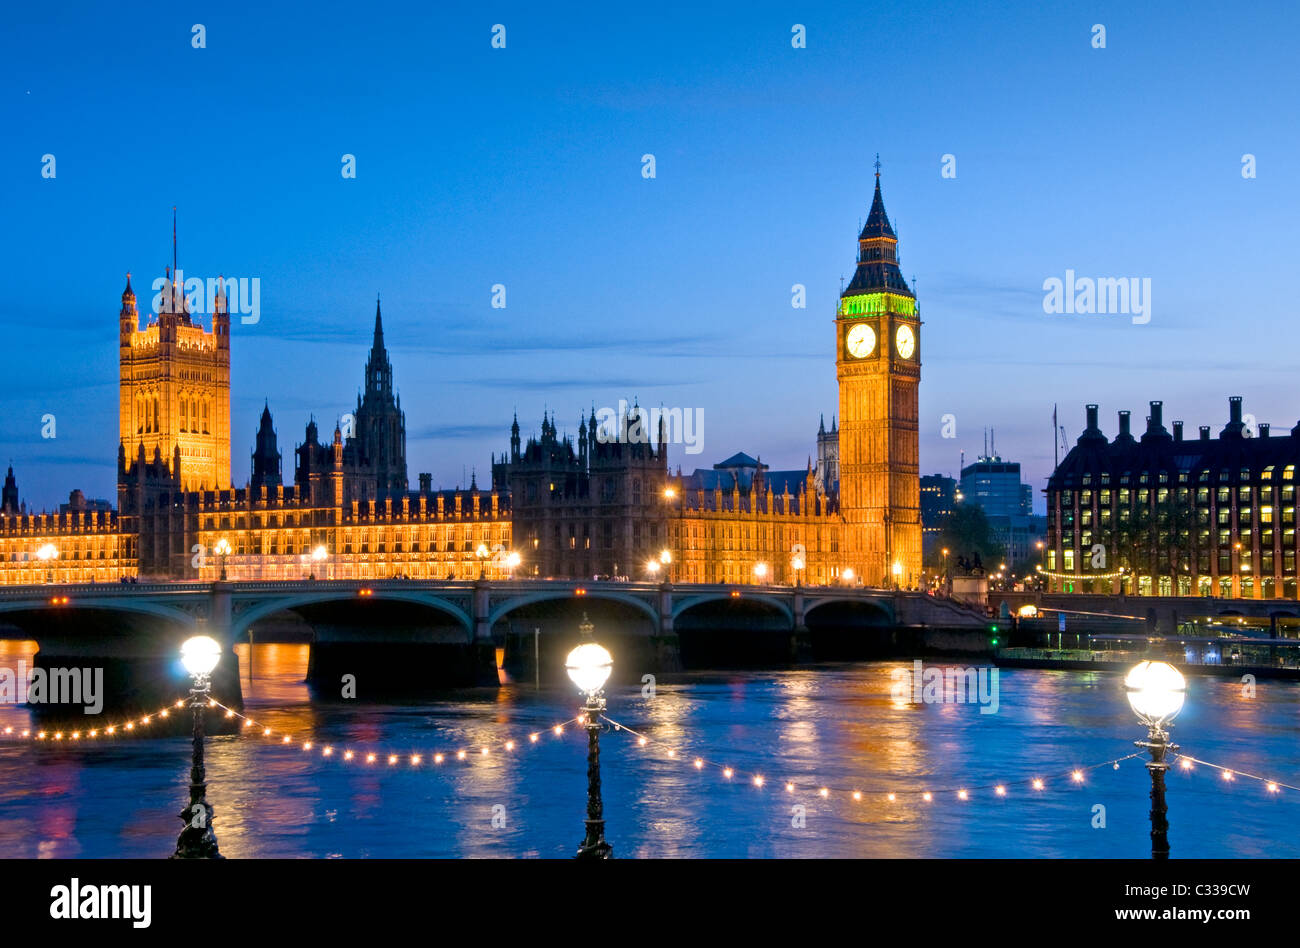 The Houses of Parliament, Westminster Bridge & The River Thames at Night, London, England, UK Stock Photo